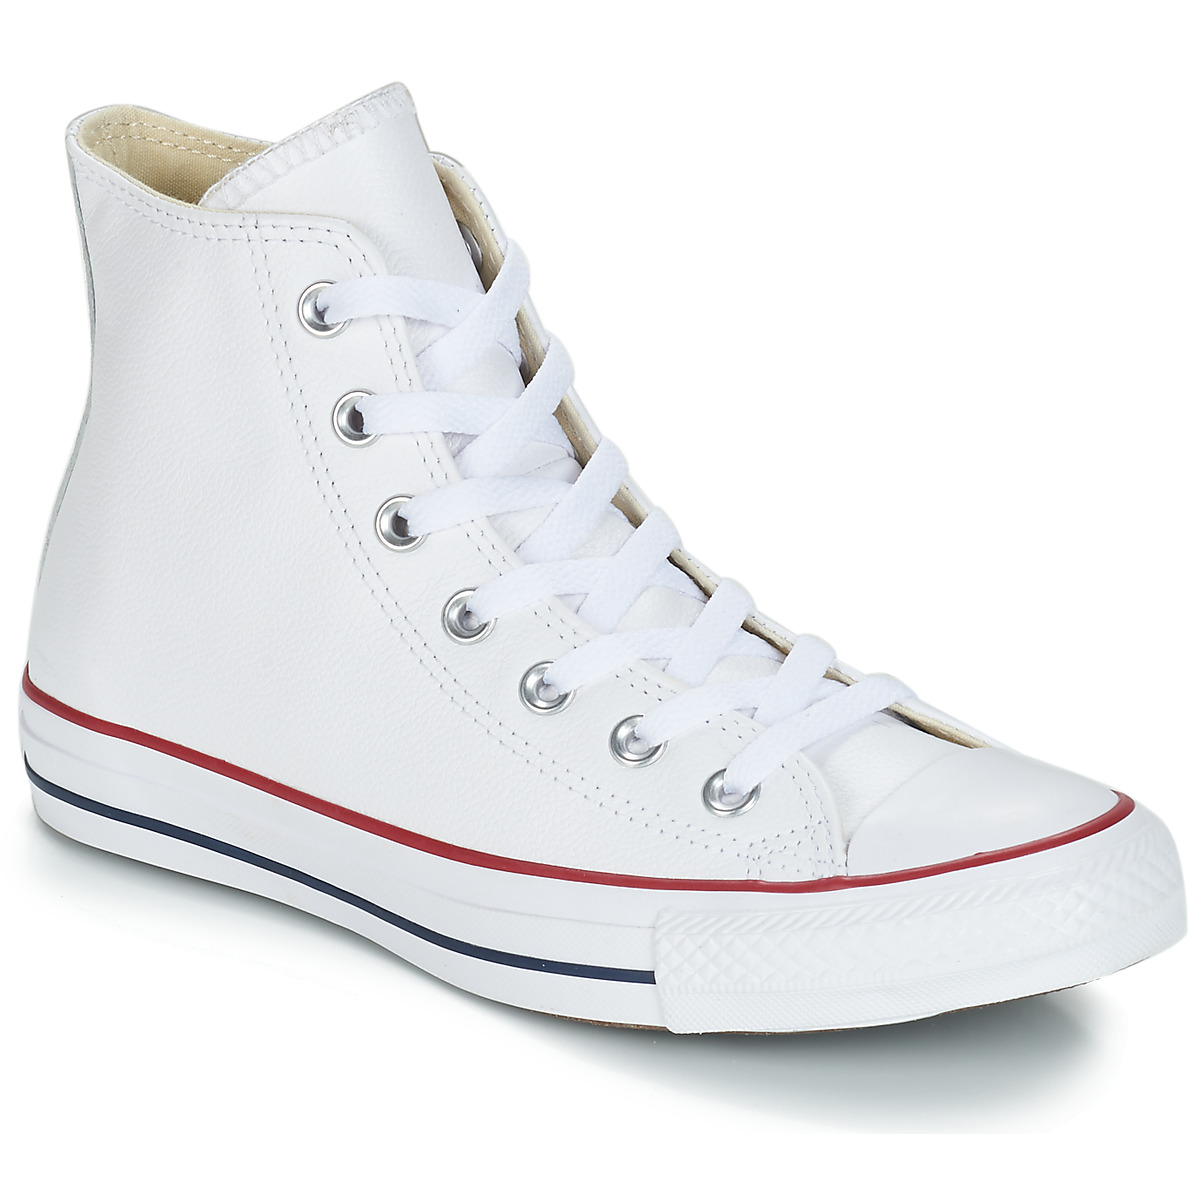 Converse Blanc CHUCK TAYLOR ALL STAR LEATHER HI ypcgd3P